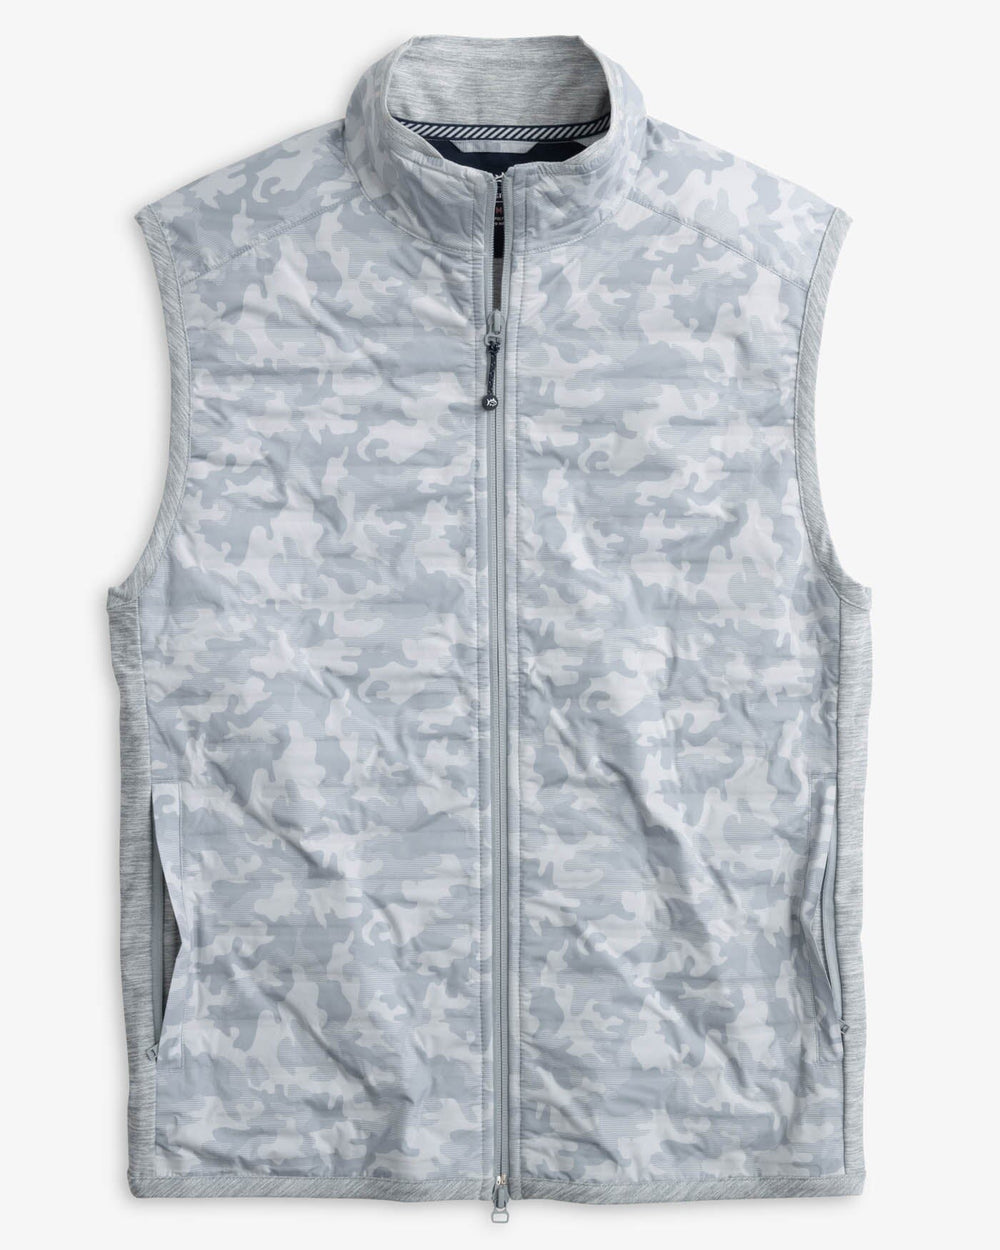 The front view of the Abercorn Camo Performance Vest by Southern Tide - Gravel Grey